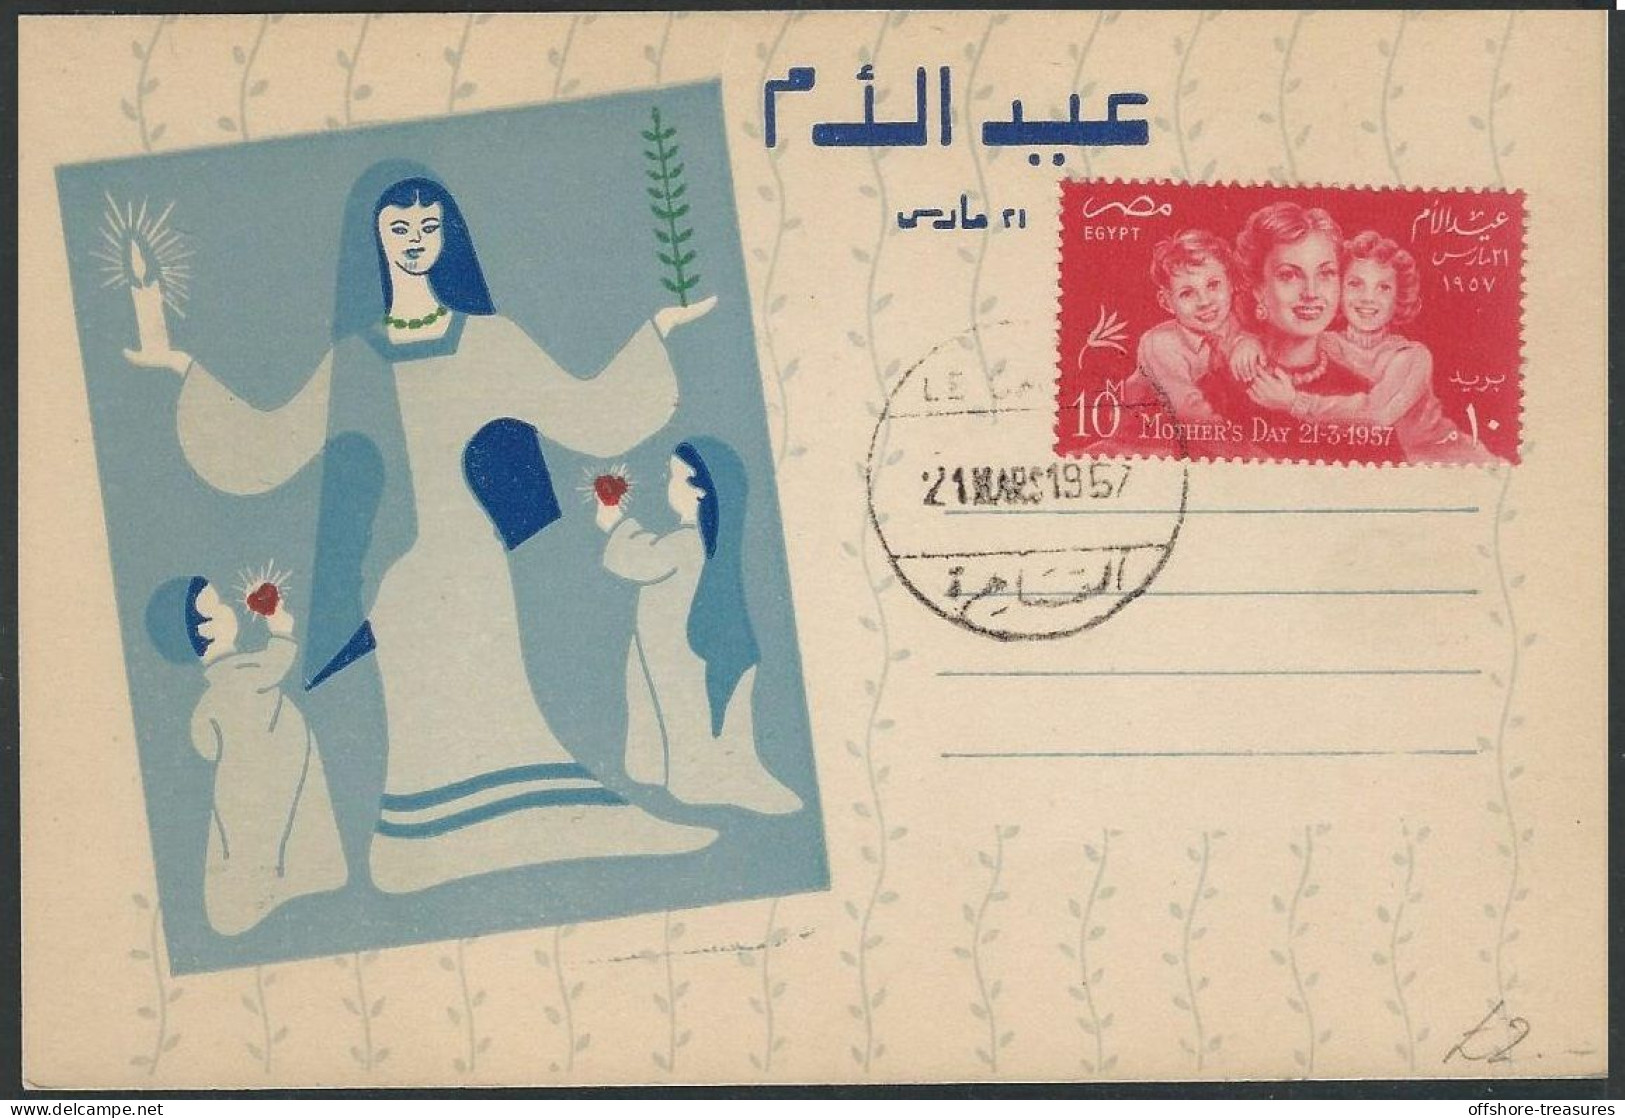 Egypt UAR 1957 First Day Cover - Postcard Mother Day - Irregular FDC / Post Card - Storia Postale